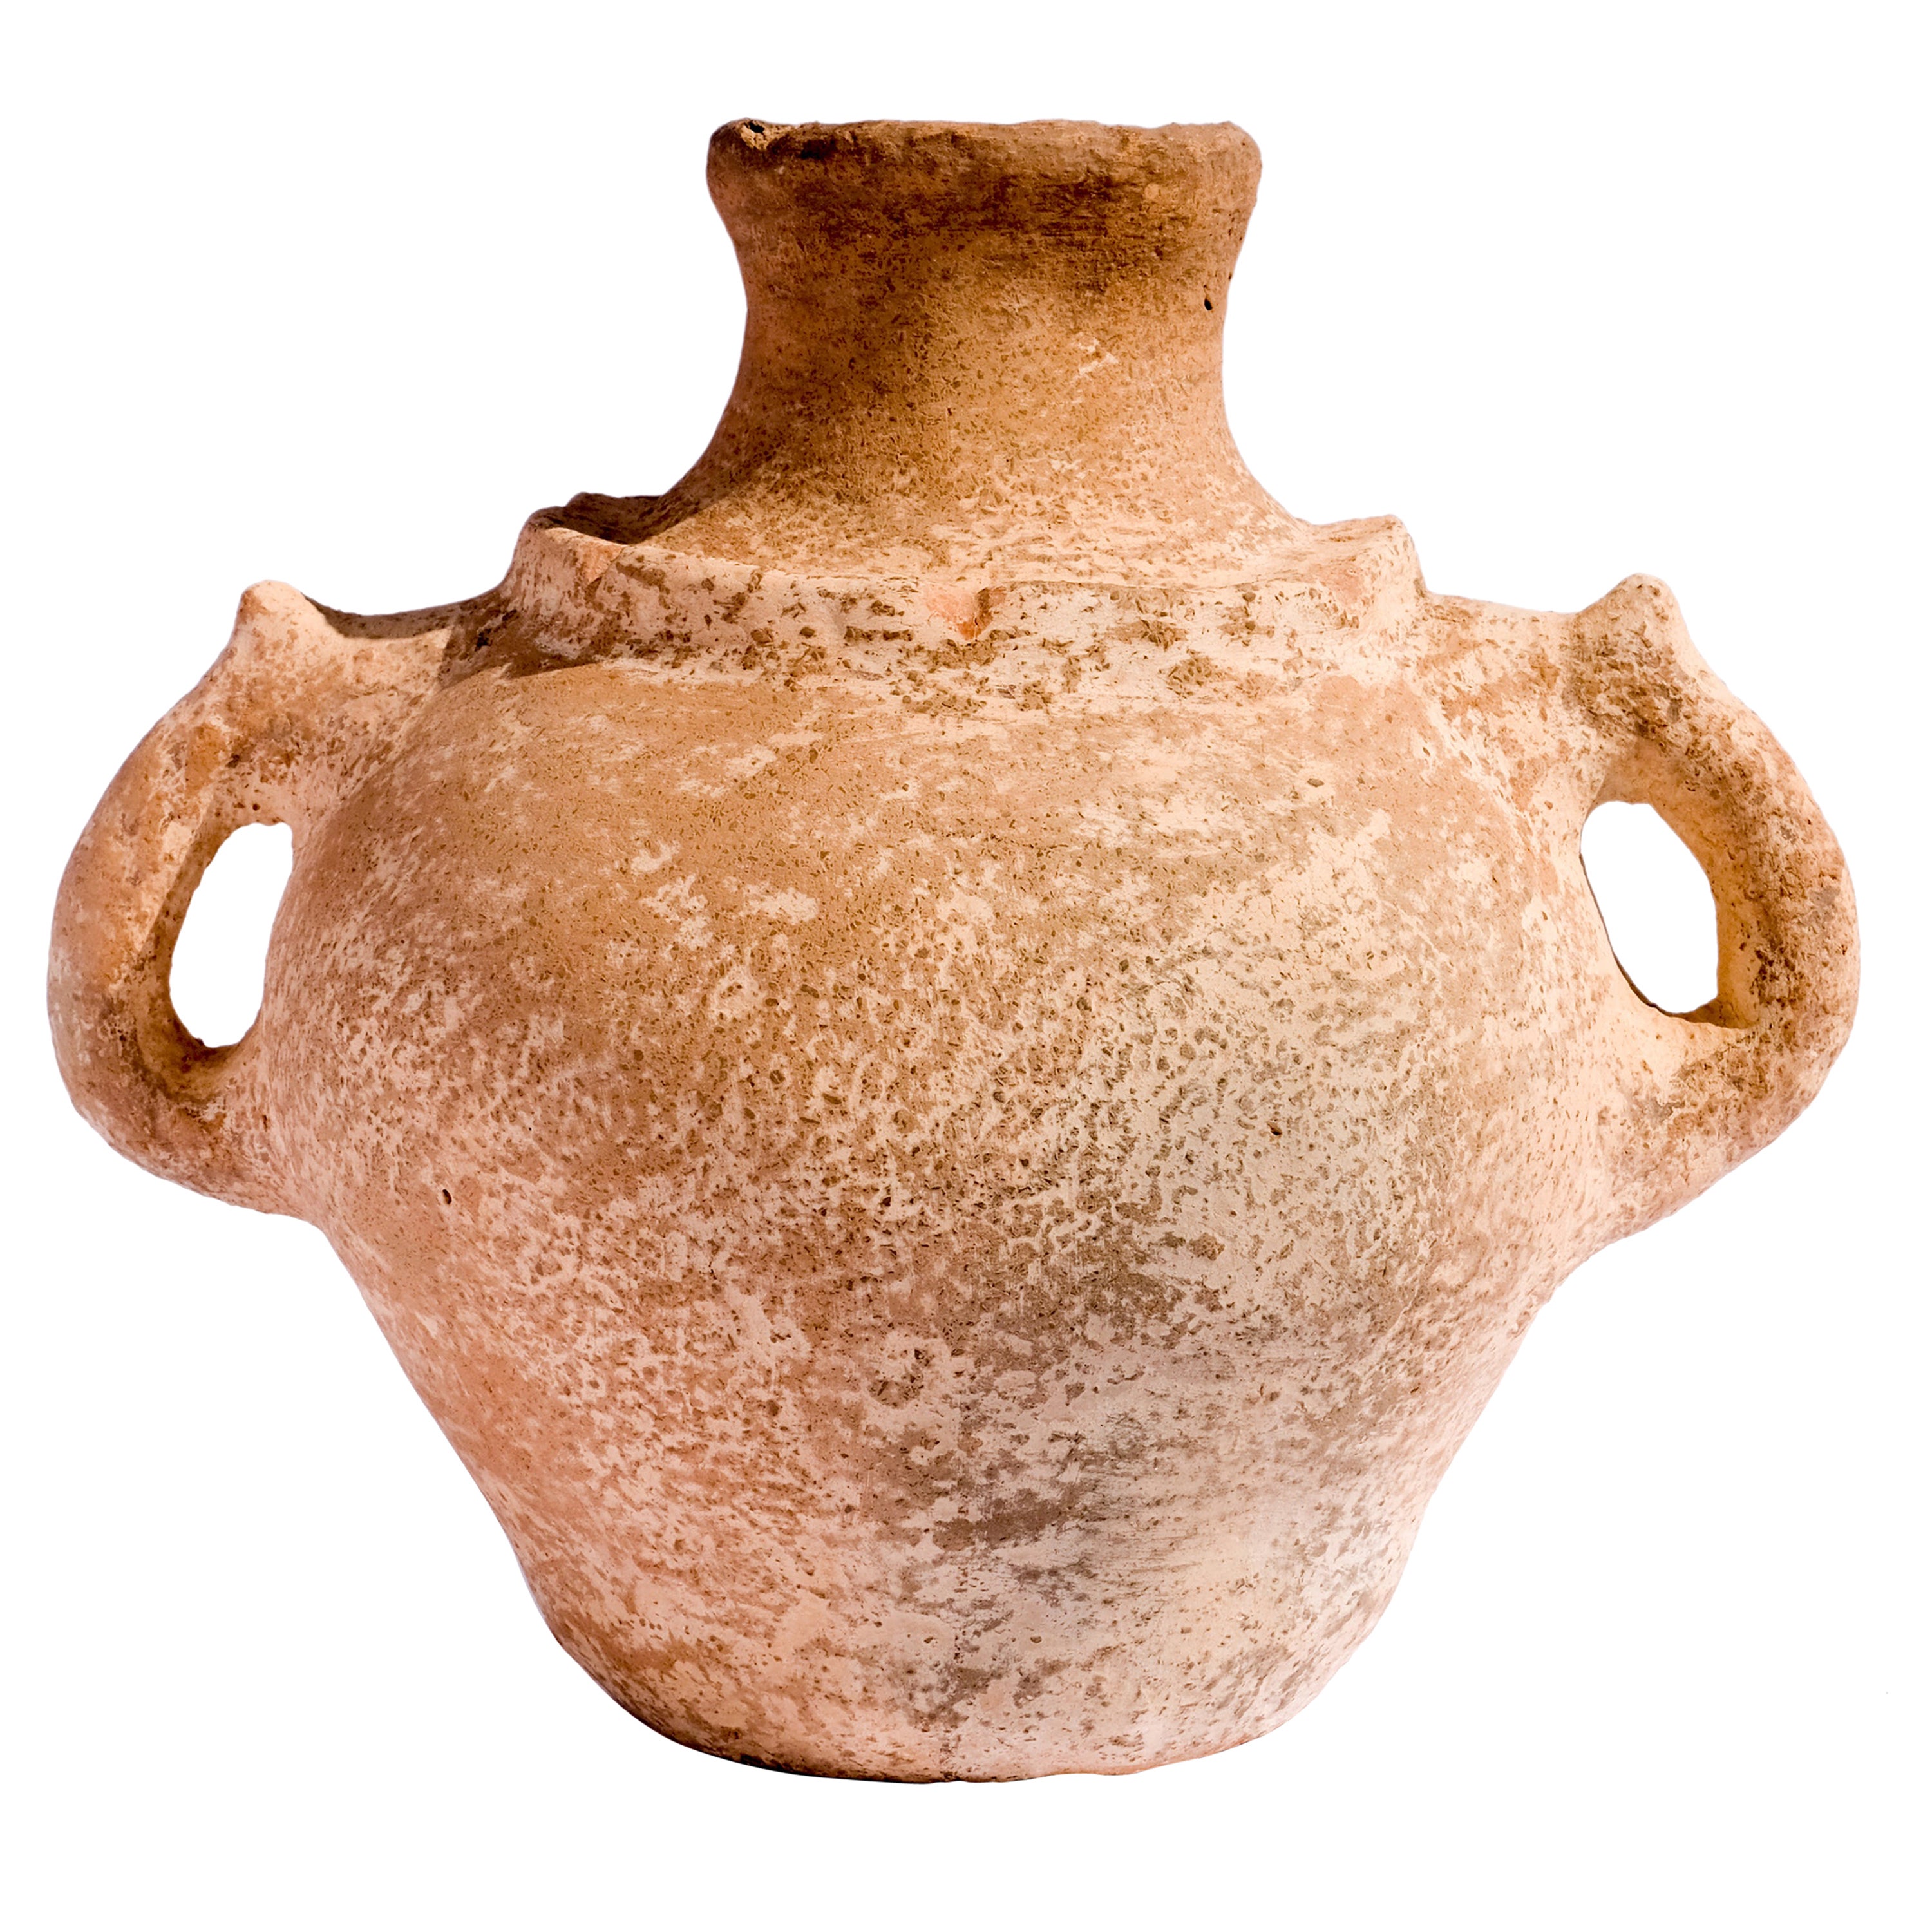 Khabia Moon Freckles Terracotta Jar Made of Clay, Handcrafted by the Potter Raja